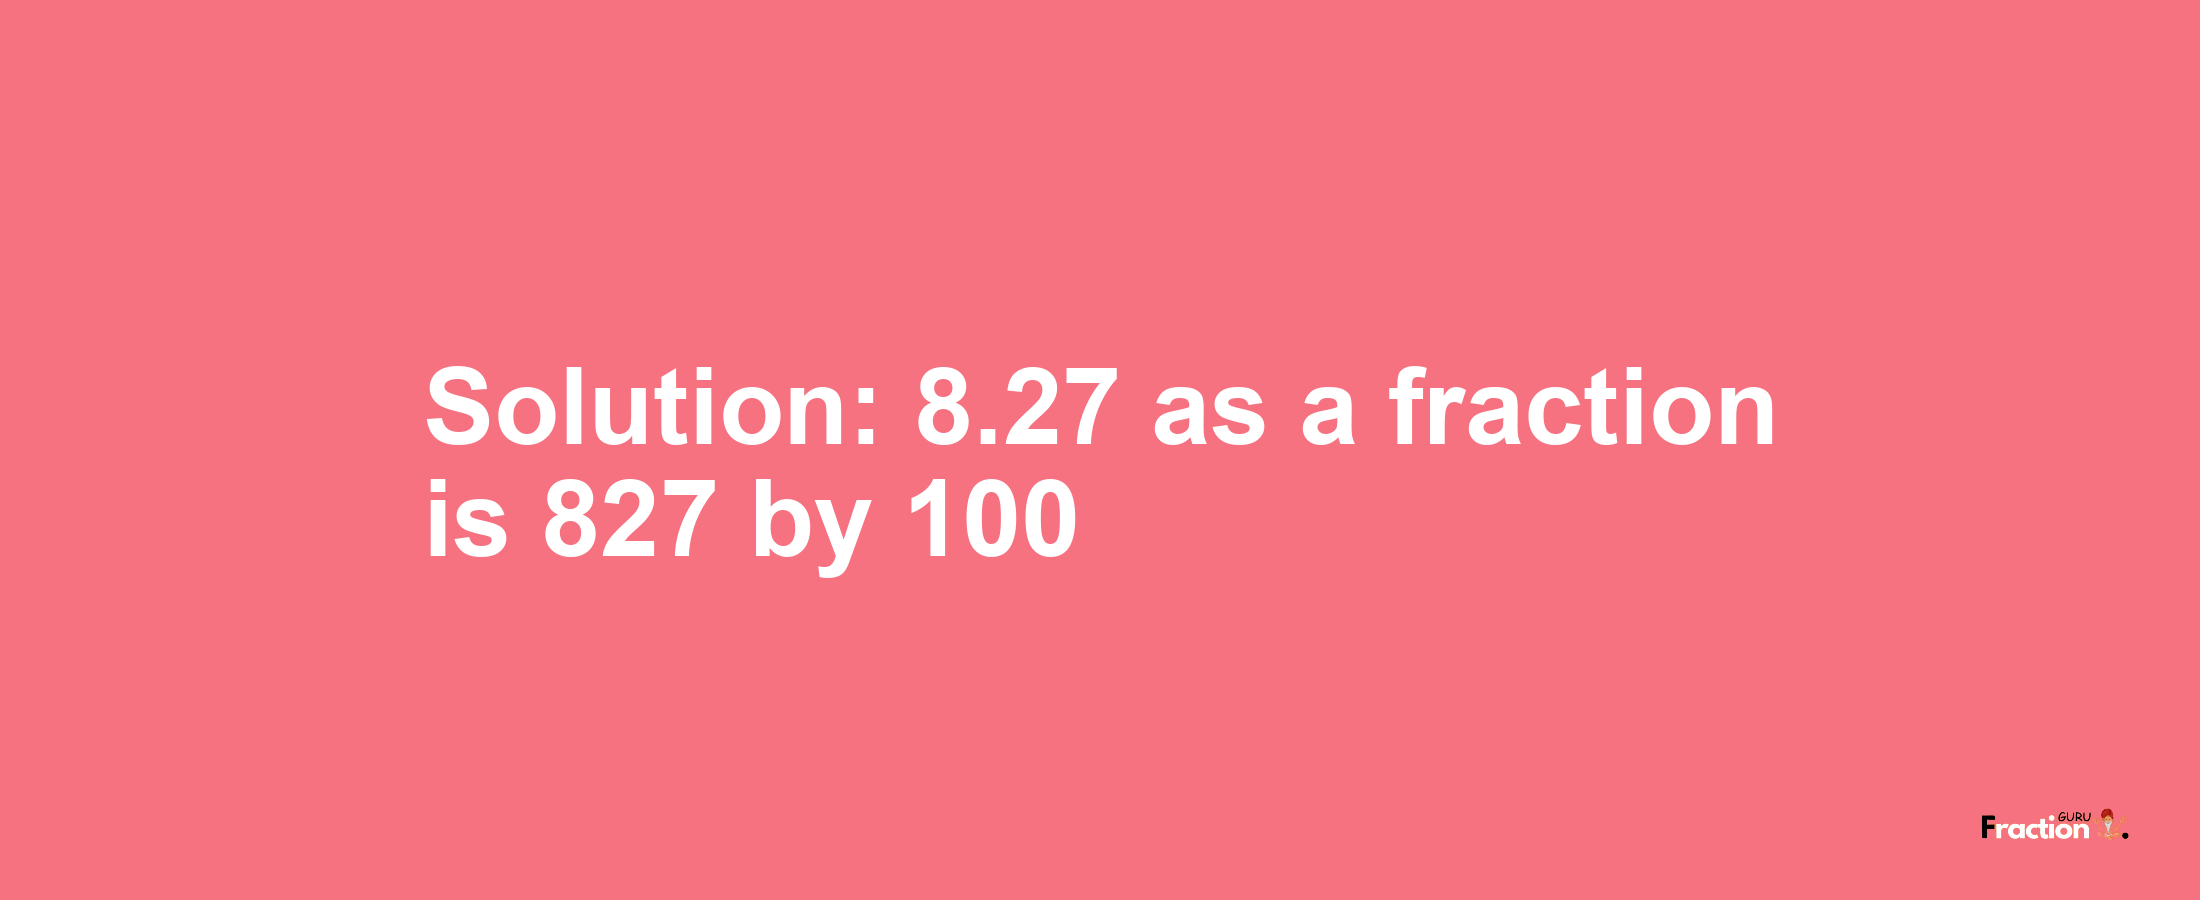 Solution:8.27 as a fraction is 827/100